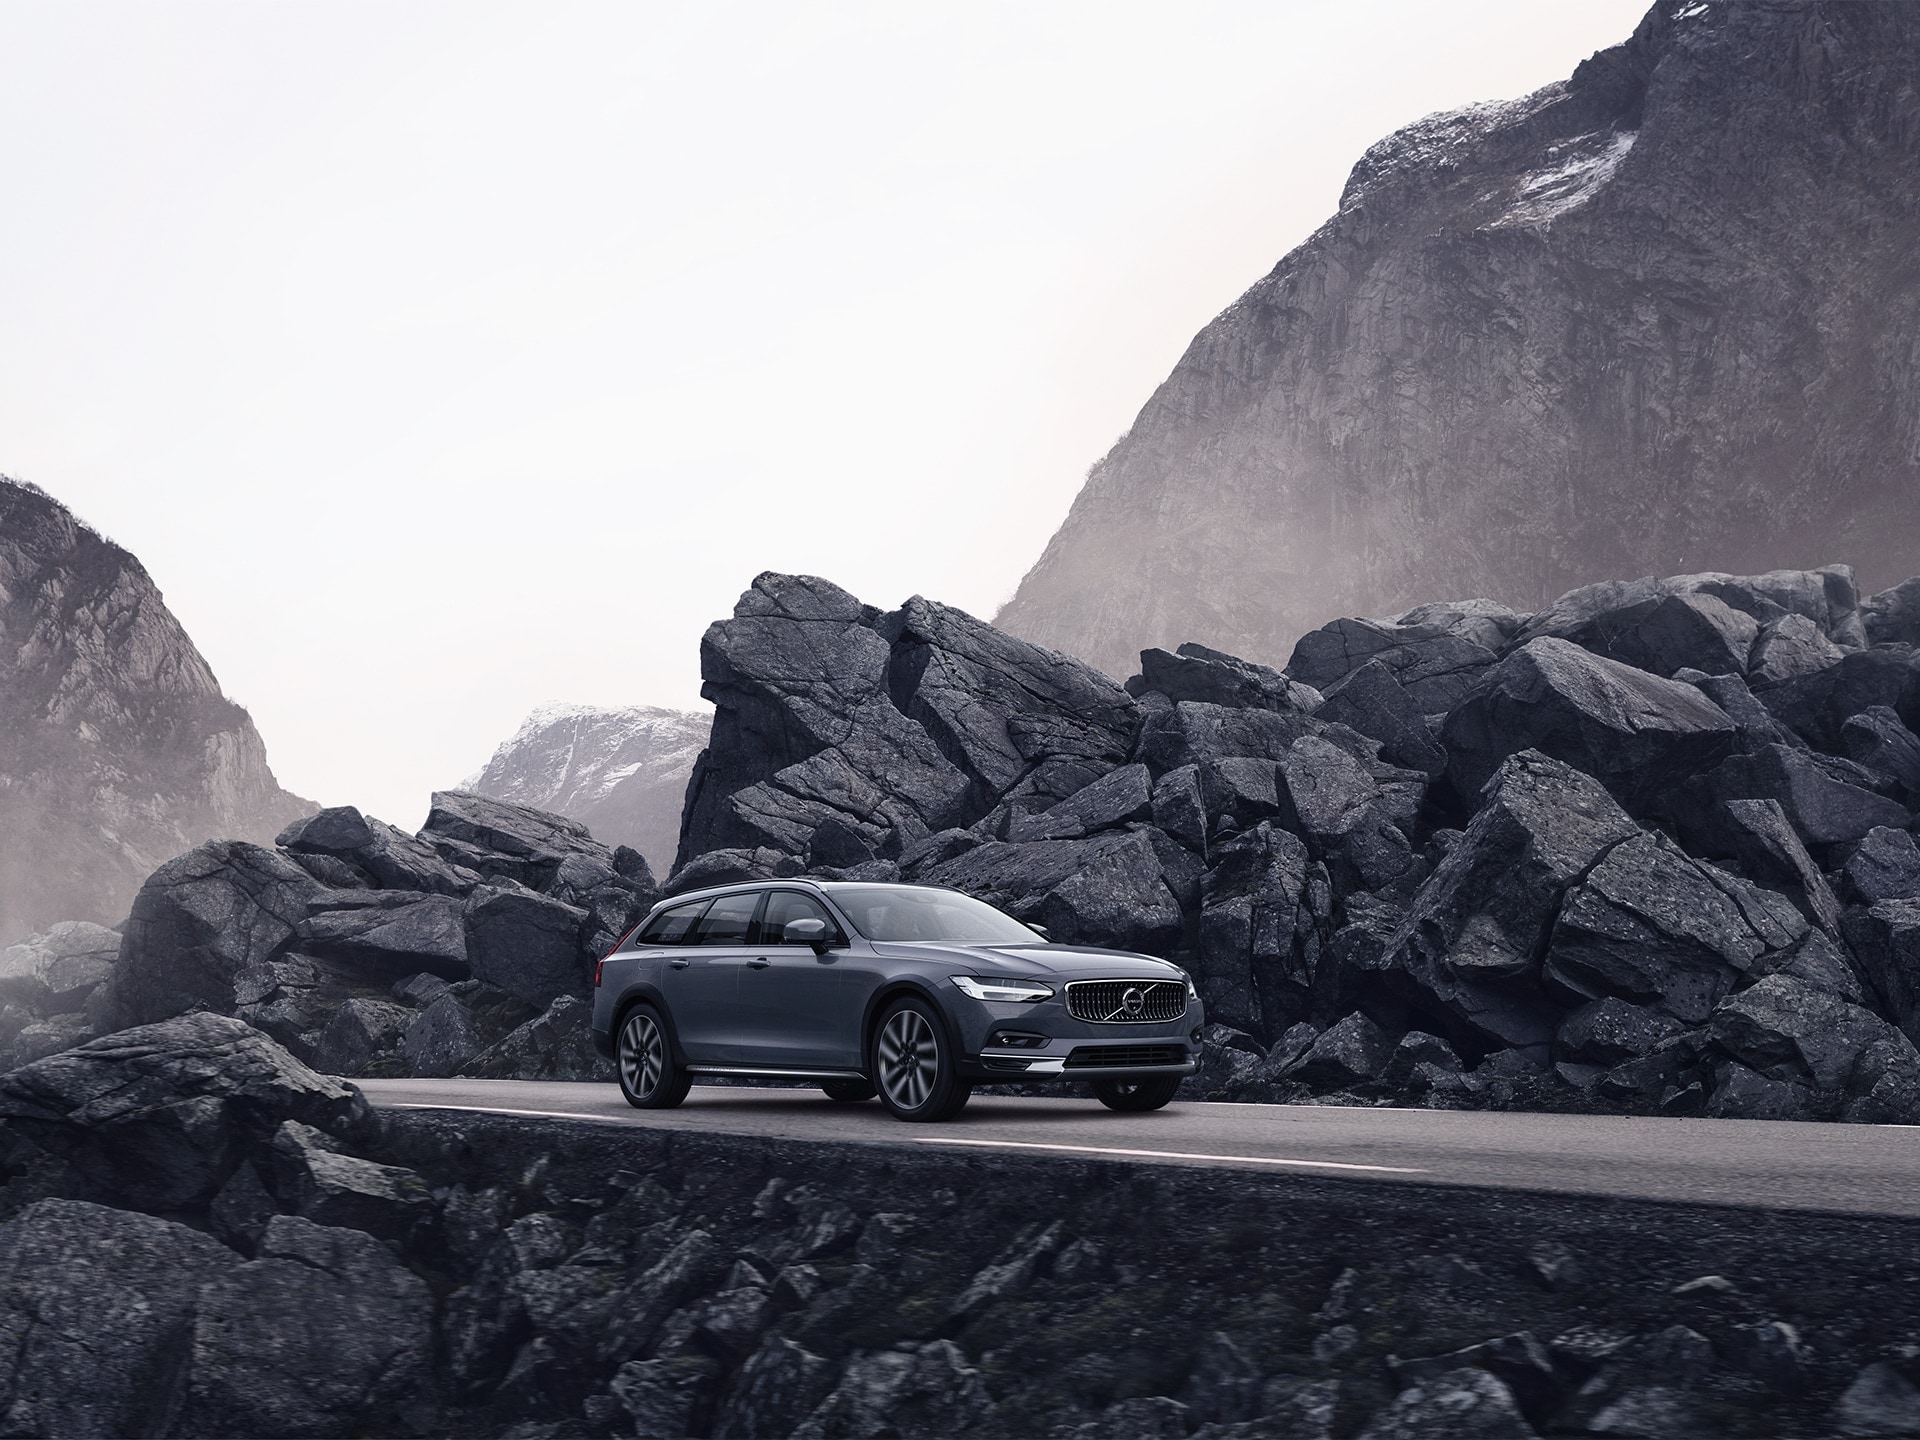 Grey Volvo driving on a road with rocks on the side of the road